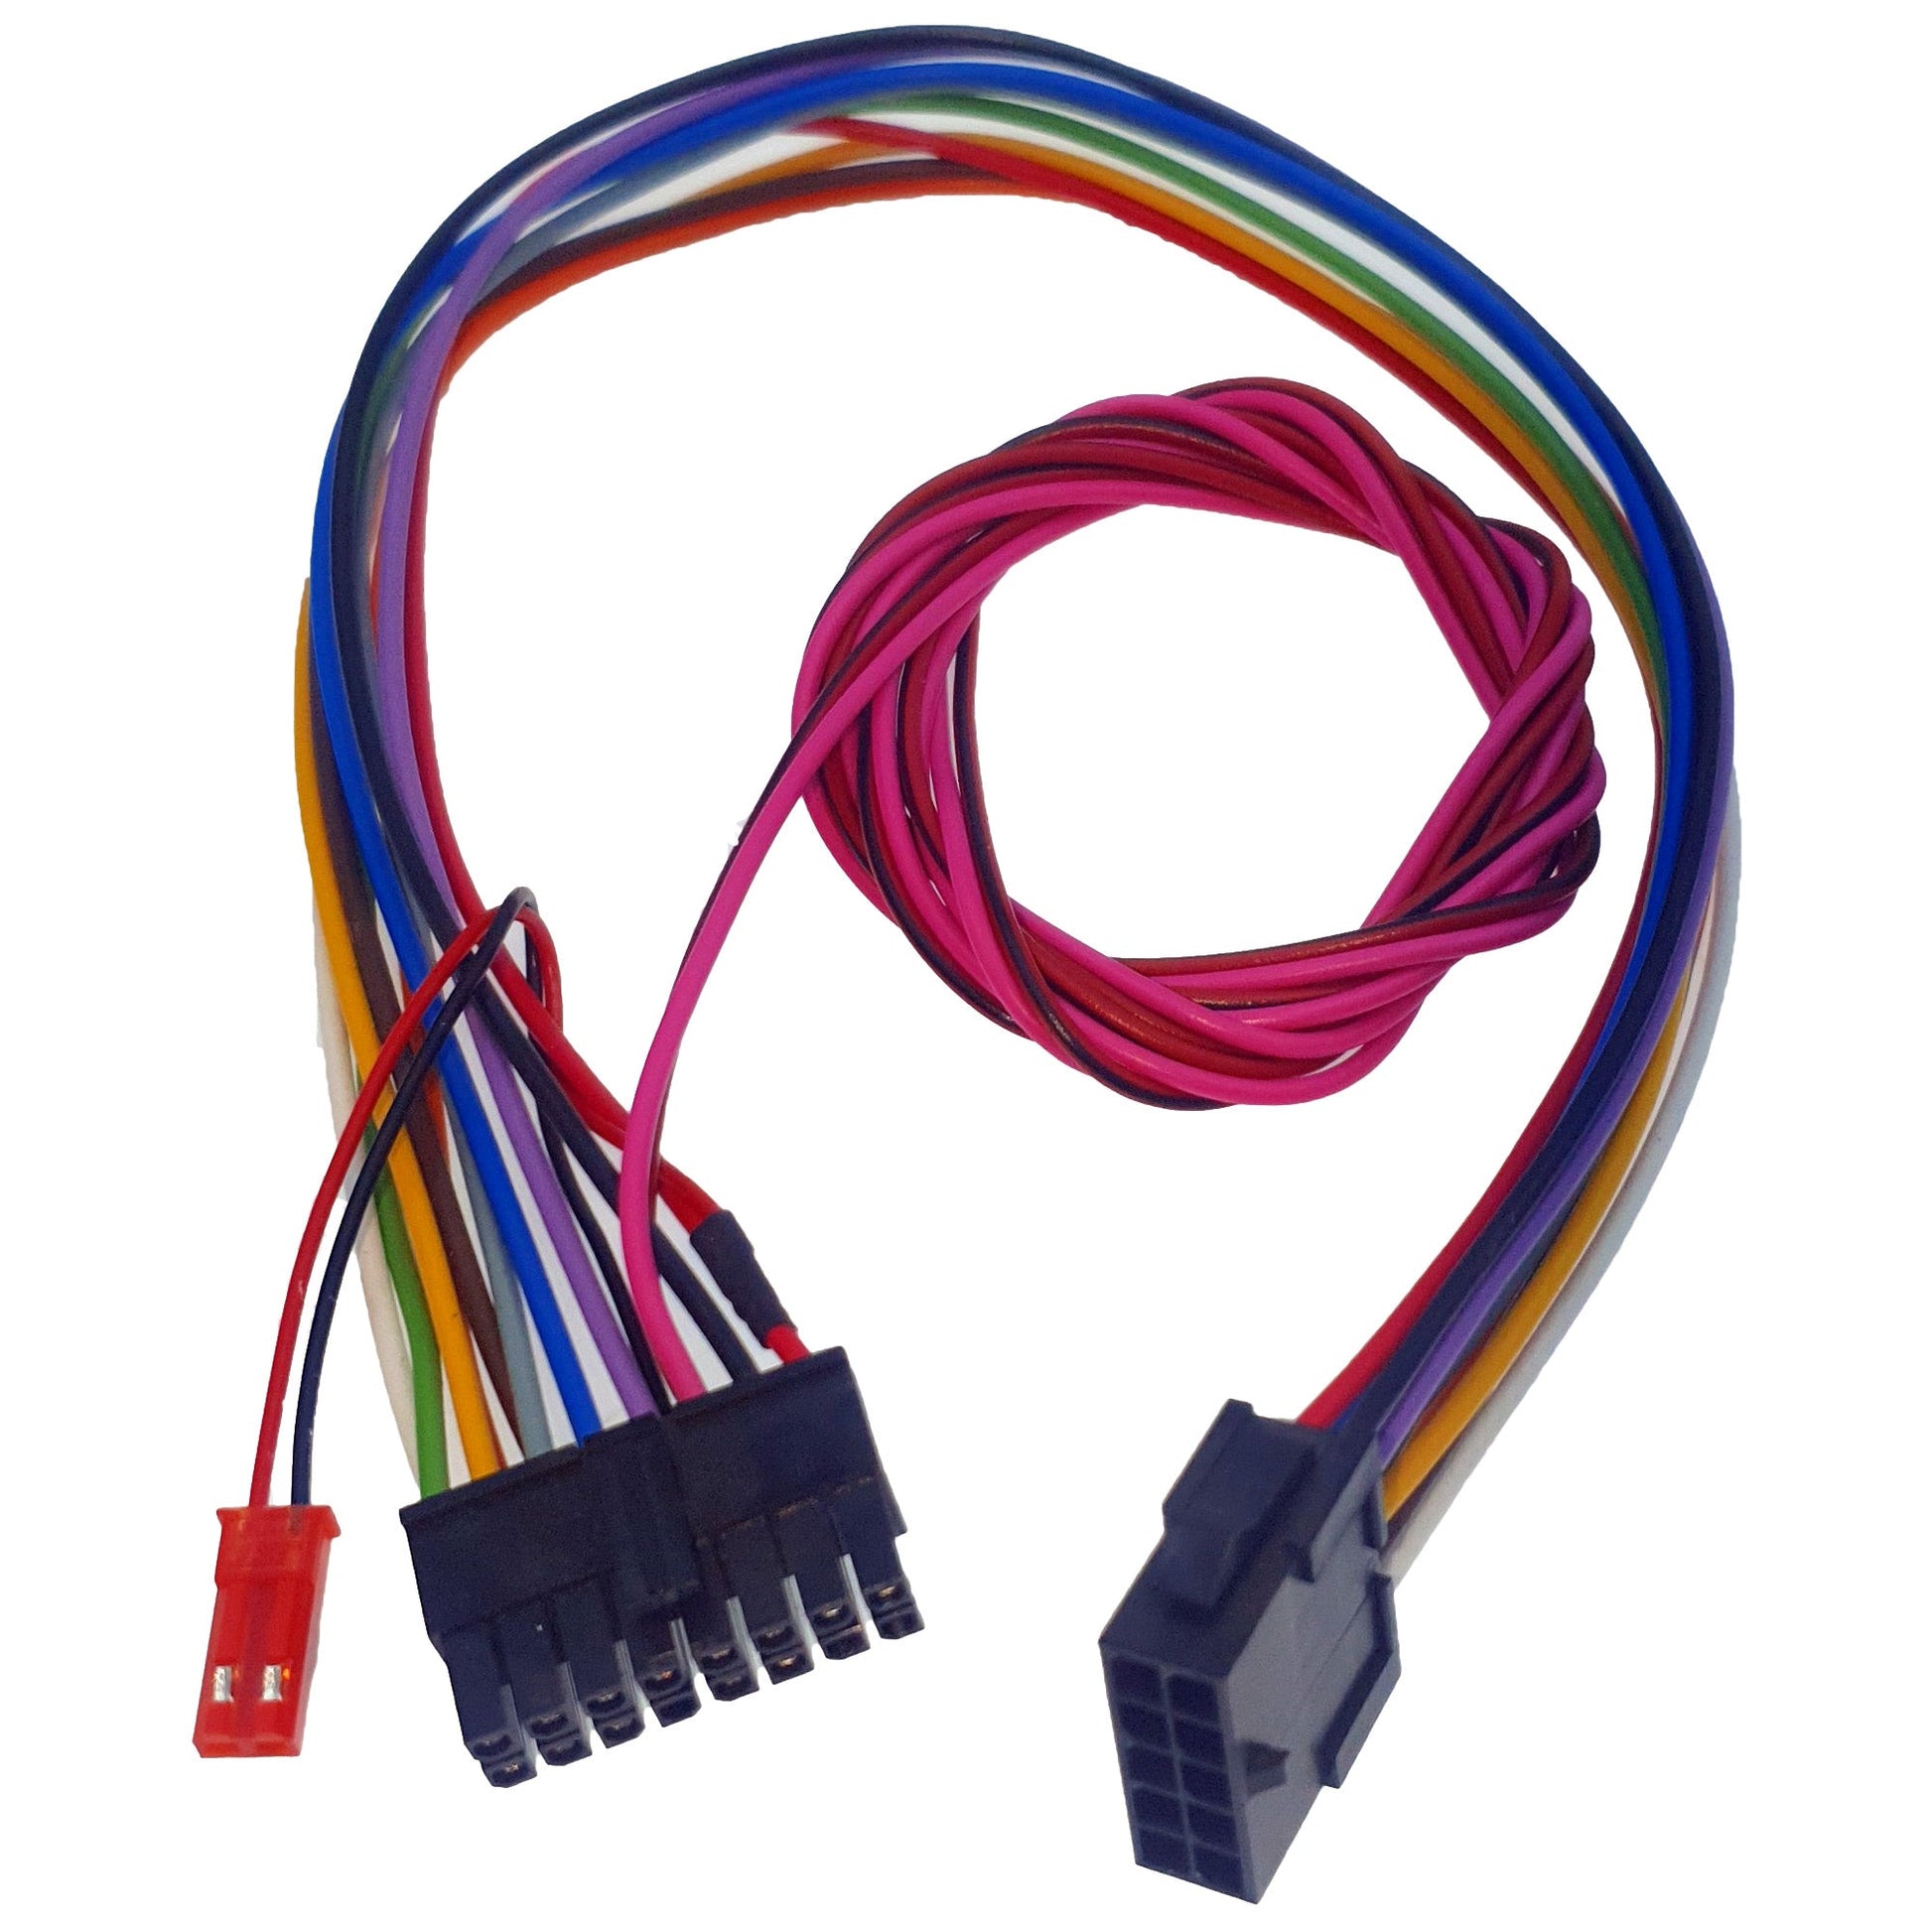 Upgrade your EMS1 or EMS2 installation with a new EMS2 by plugging in this simple harness.\n\nThis harness will plug directly into a legacy EMS1/2 (10 Pin) harness and provides additional wires for the extra functions offered by the EMS3 over the EMS1/2